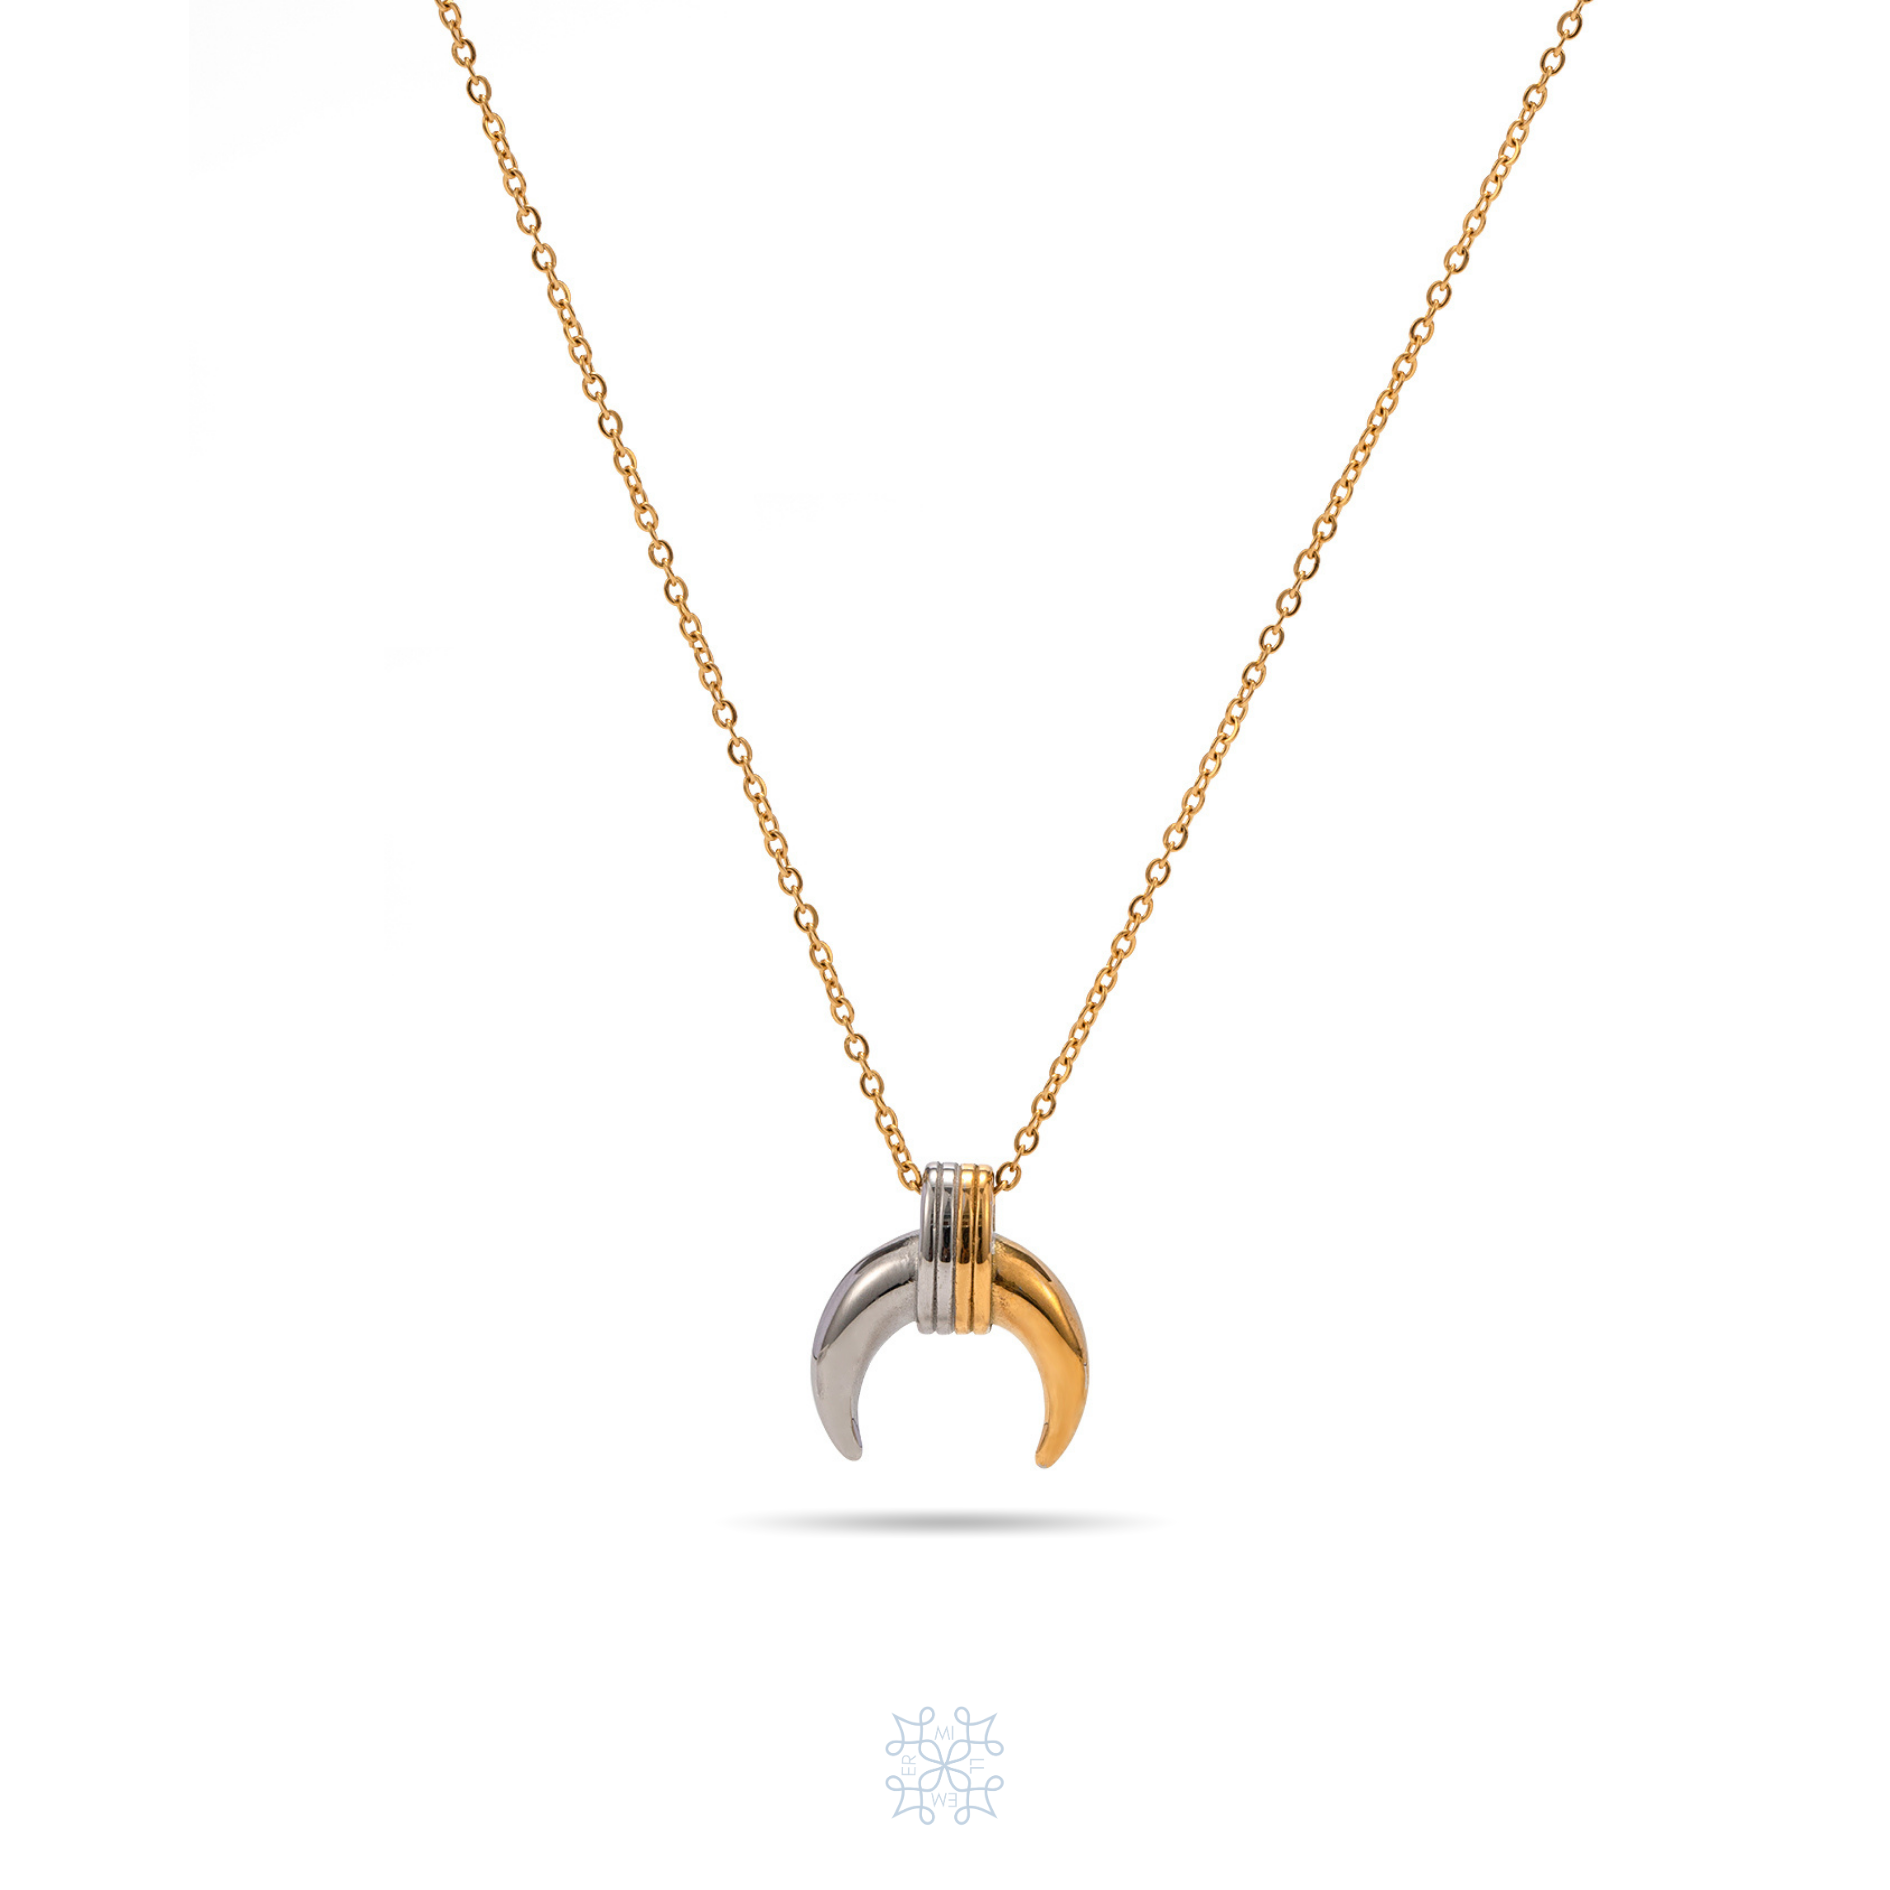 Gold chain necklace. A draper moon shape pendnat. Half of the moon is gold the other half is silver. The draper moon has the angles upside down droping from the chain to the bottom. Sailor Moon Pendant Gold Silver Necklace